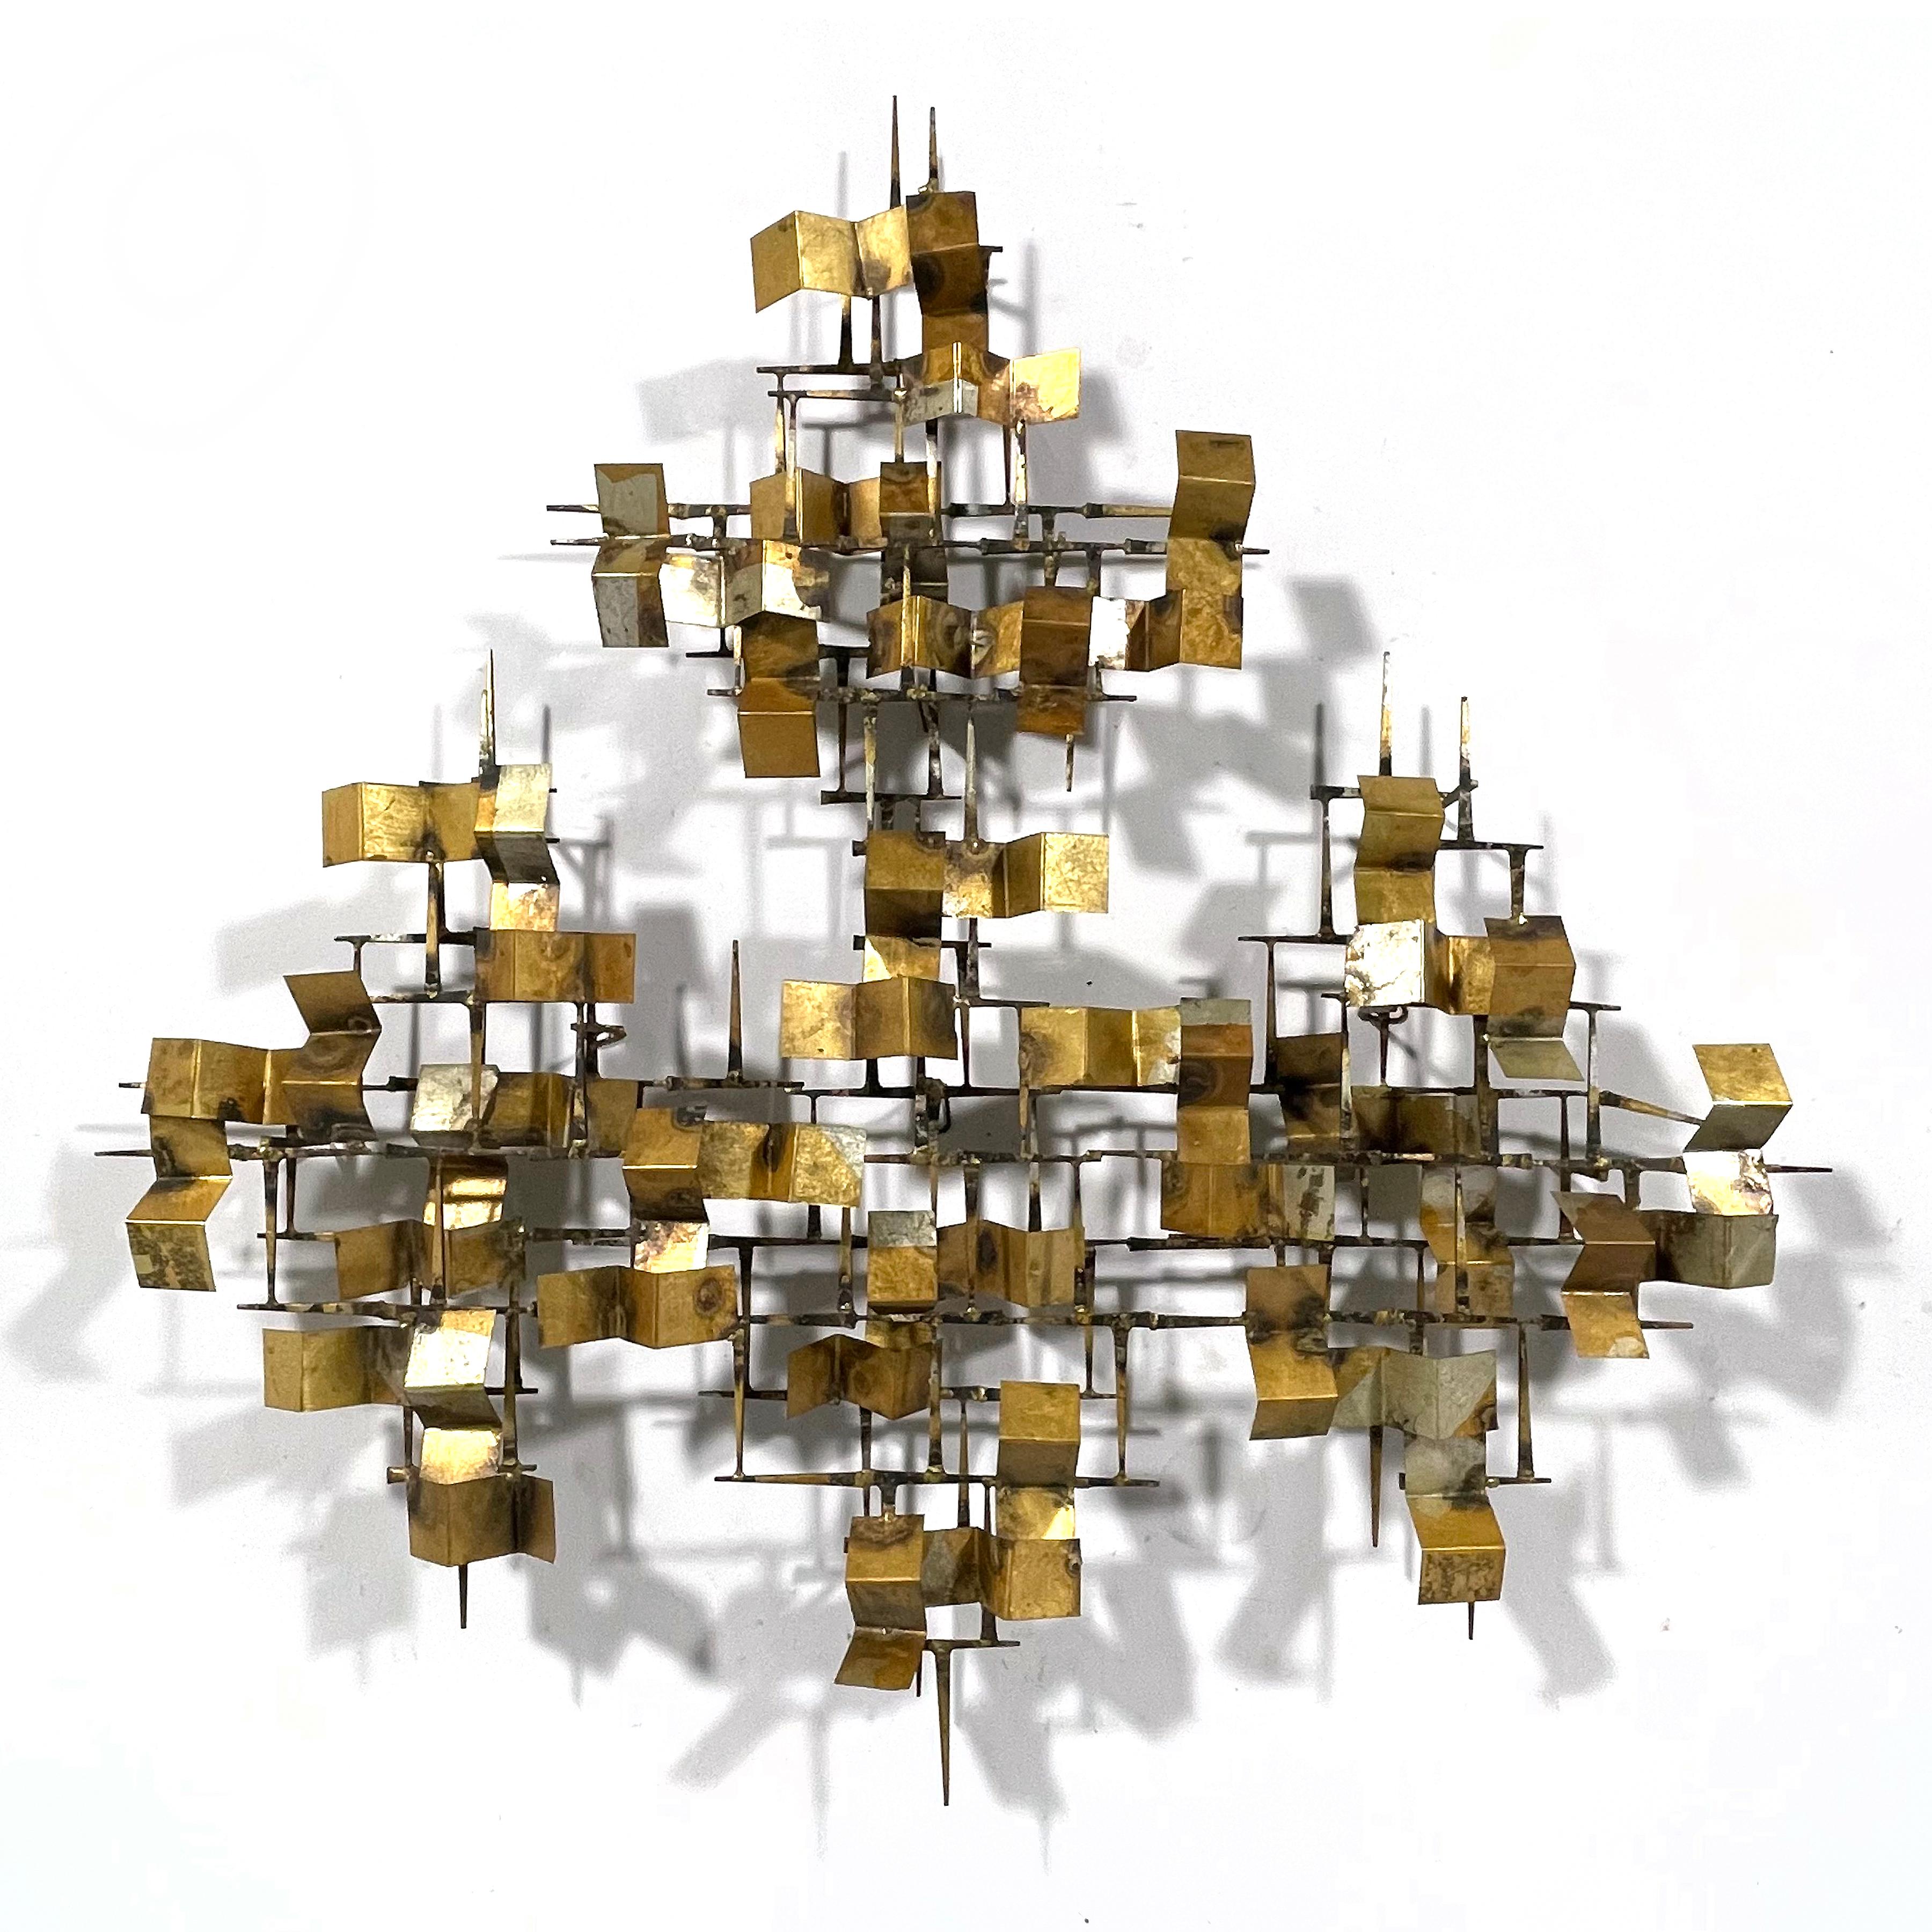 This dynamic abstract wall sculpture by William Bowie is a visual delight and activates any wall it is installed on. Titled 